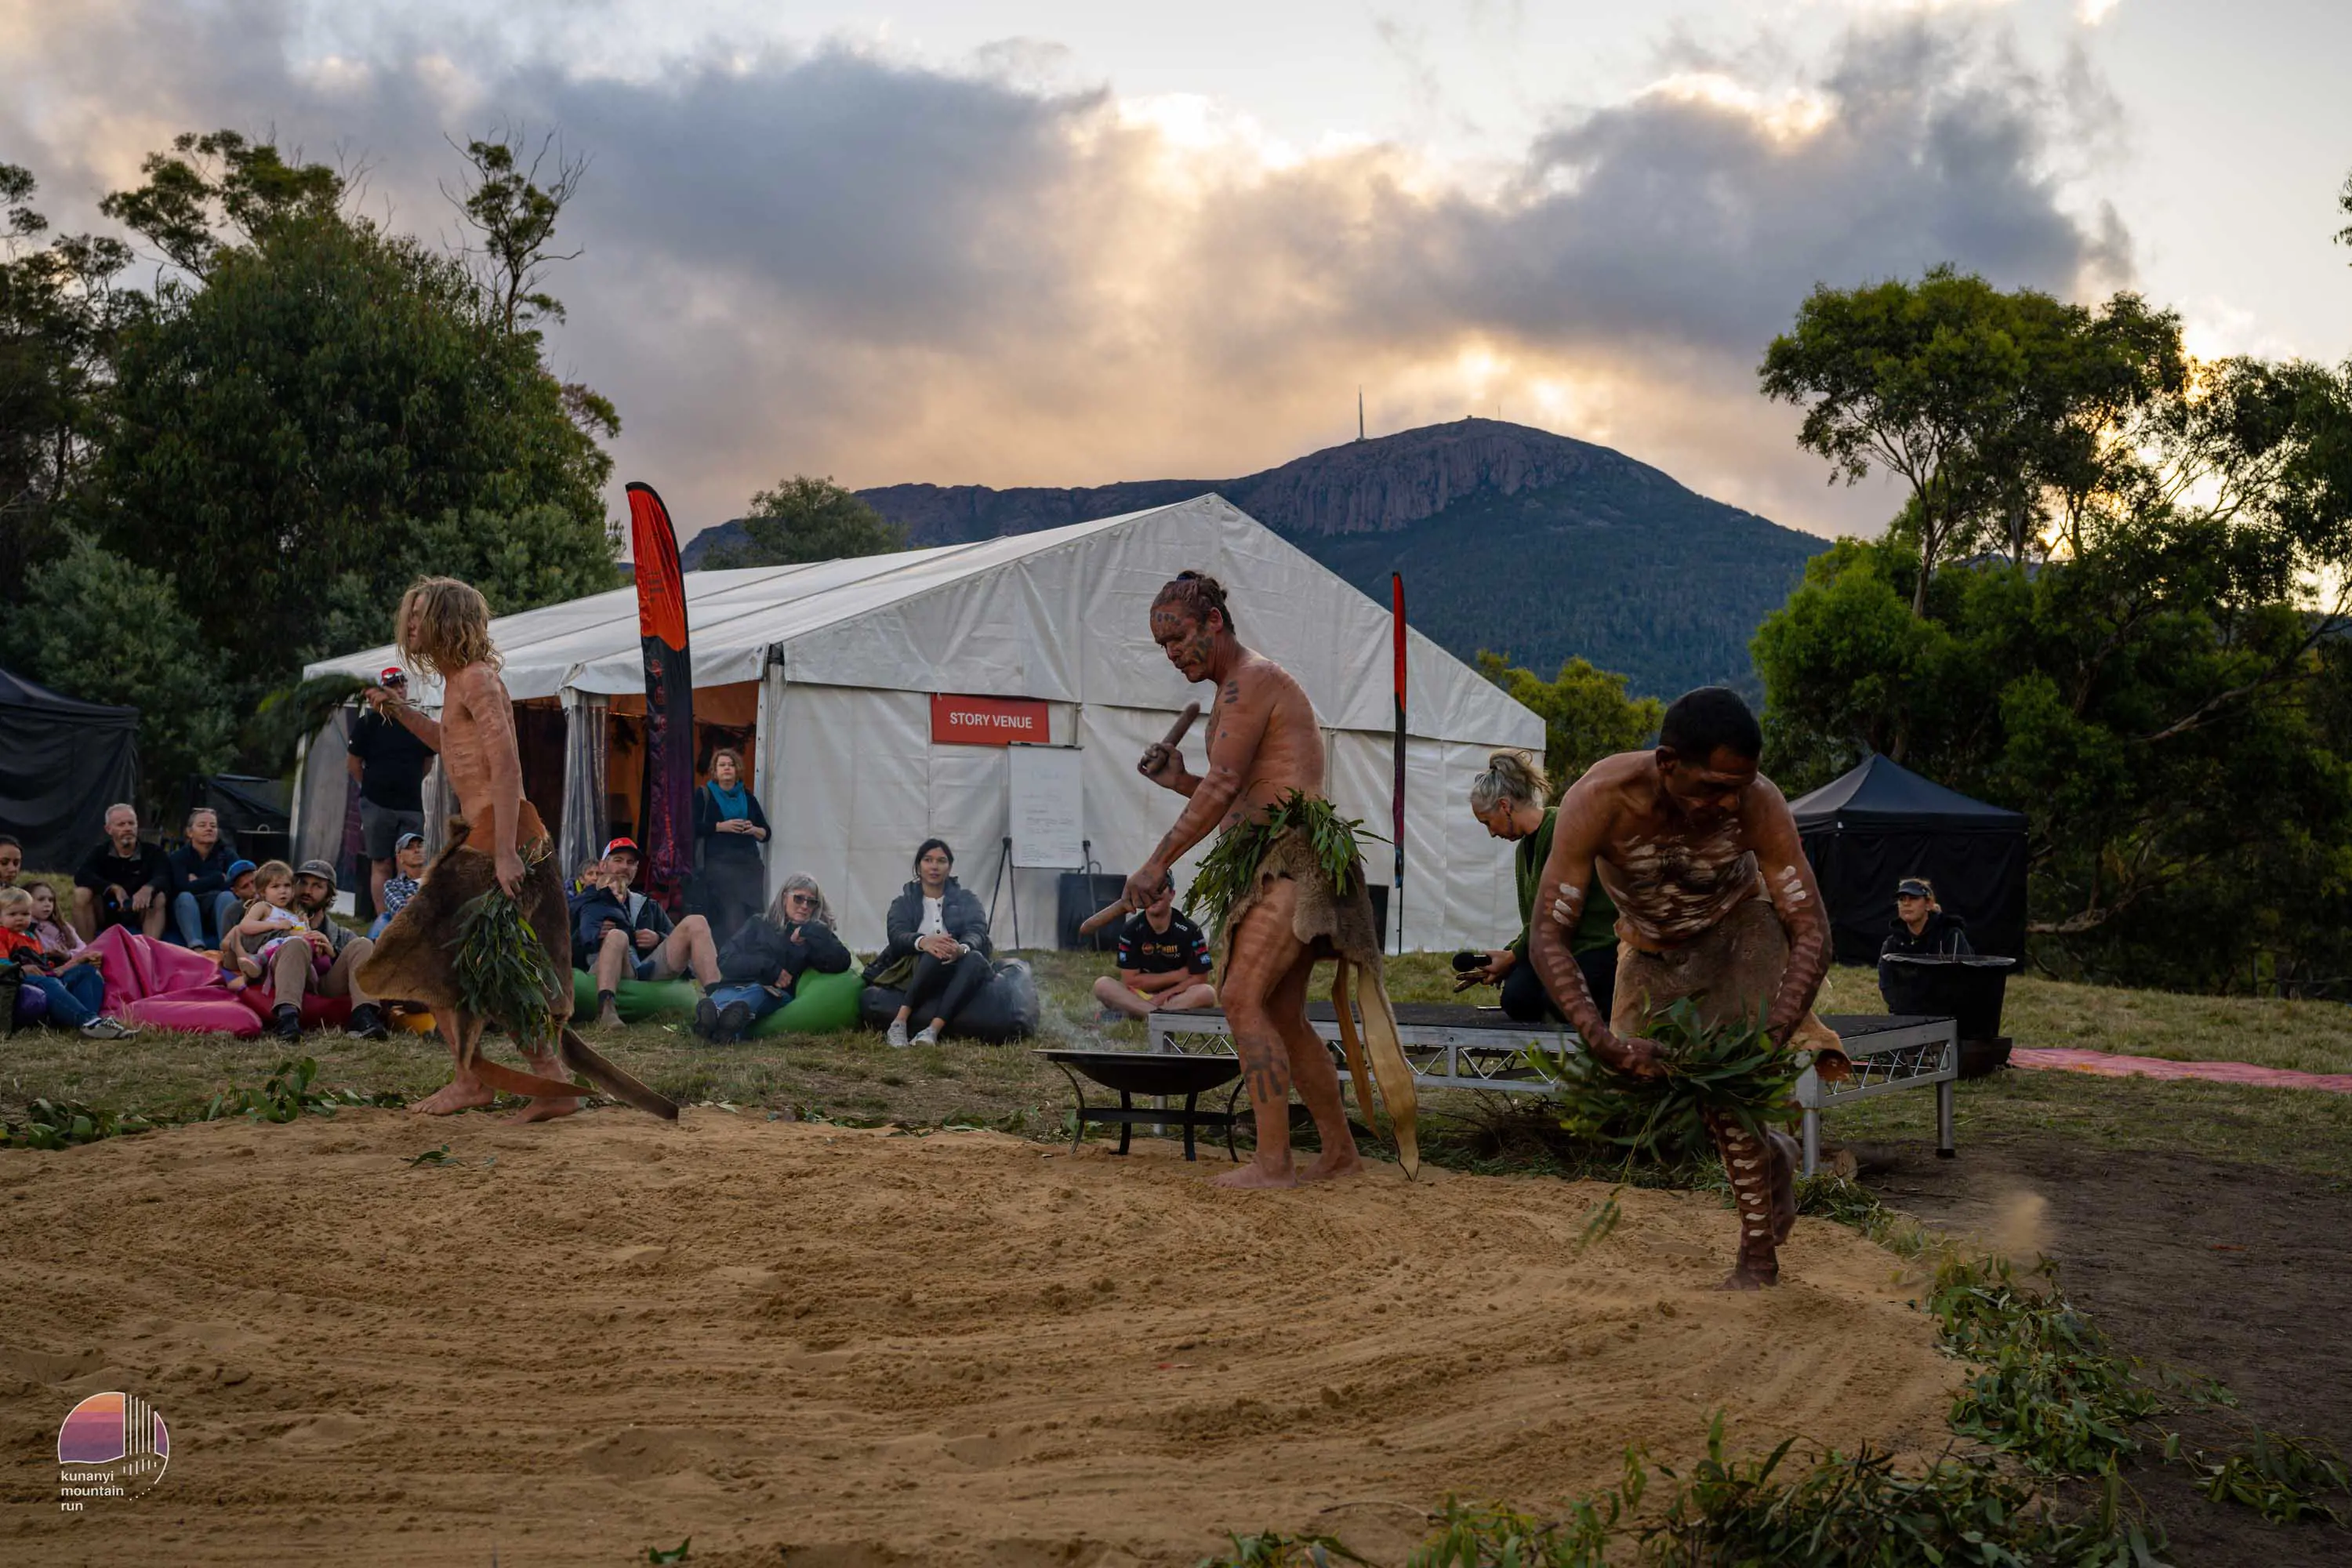 A group of Tasmanian Aboriginal men perform a ceremonial dance on an area prepared in front of tents for a running race.